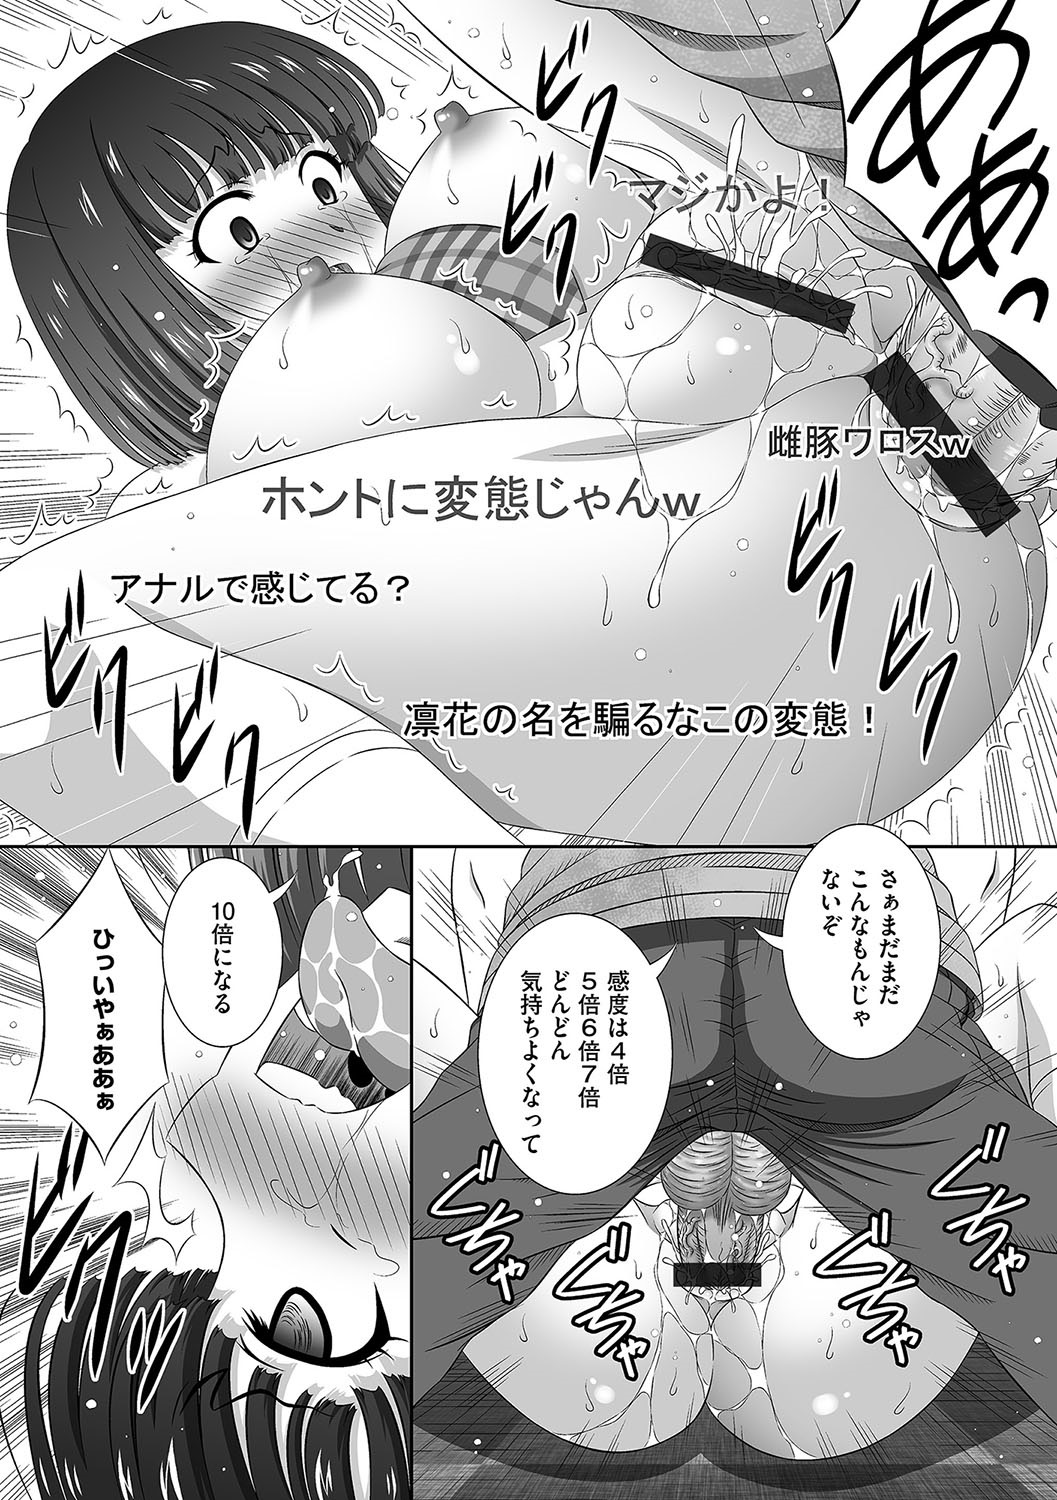 [Anthology] Cyberia Maniacs Saimin Choukyou Deluxe Vol. 006 [Digital] page 22 full